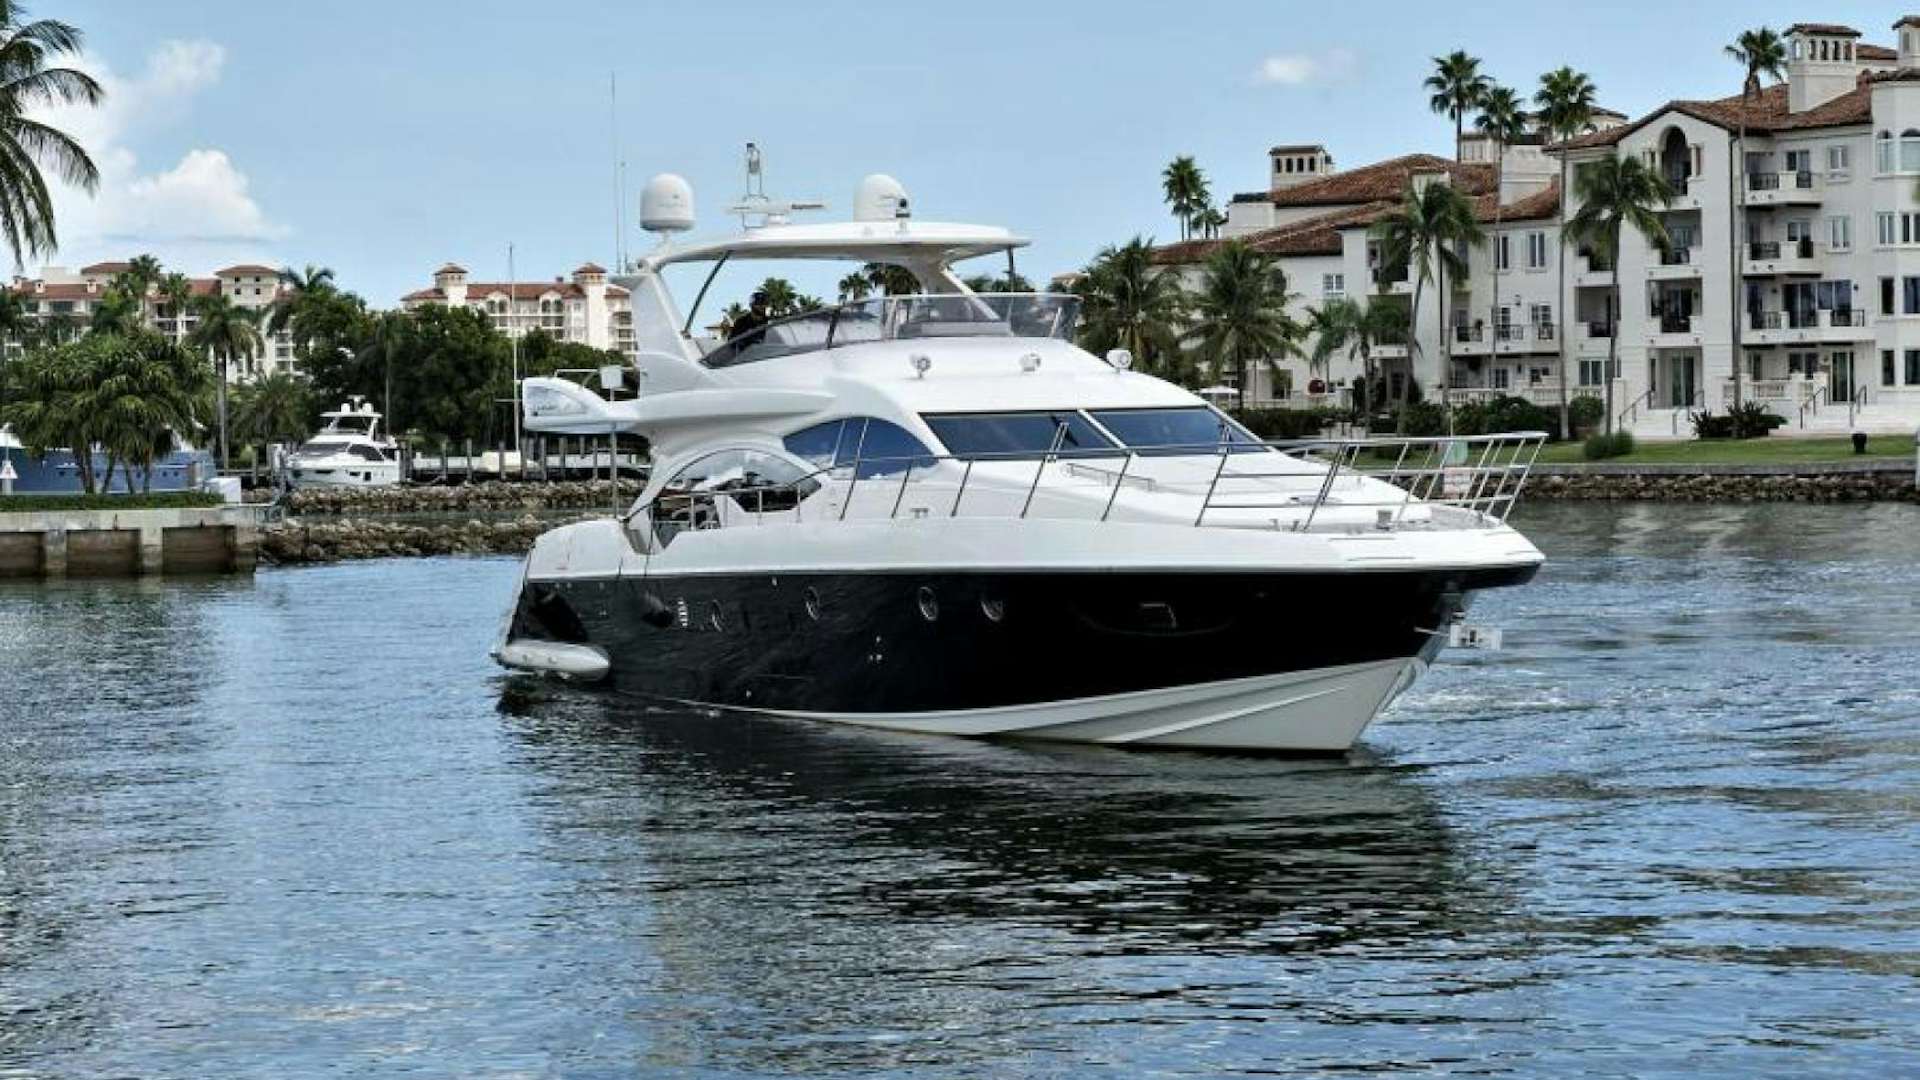 Wicked
Yacht for Sale